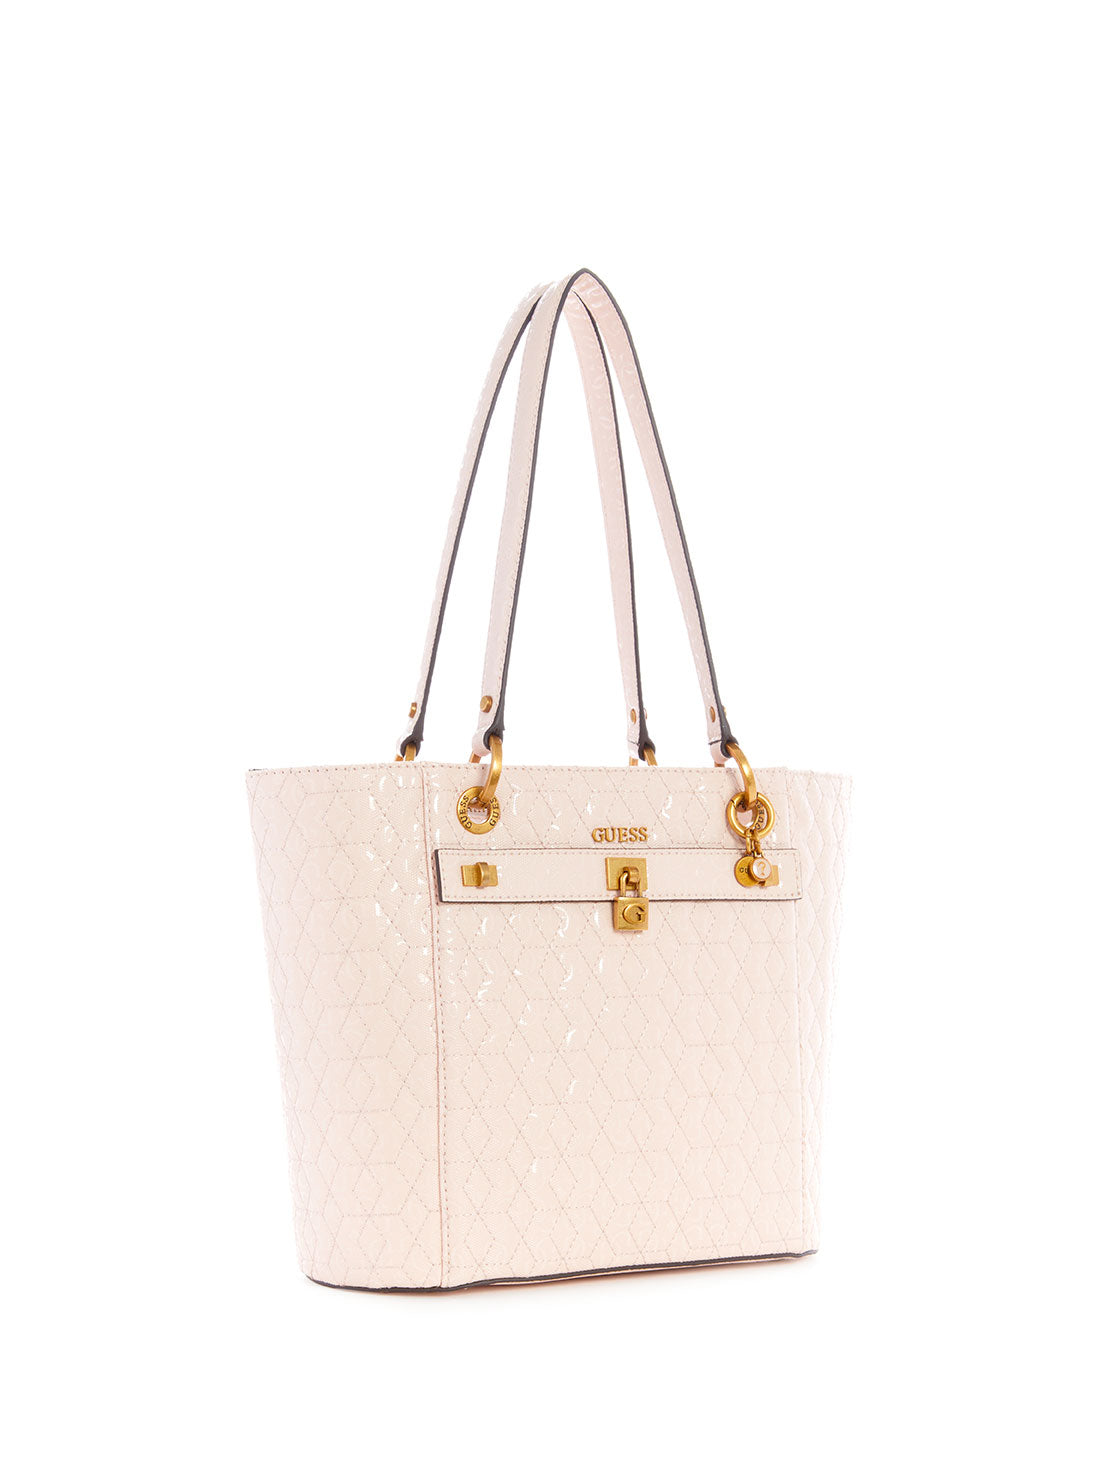 Guess Noelle Small Tote